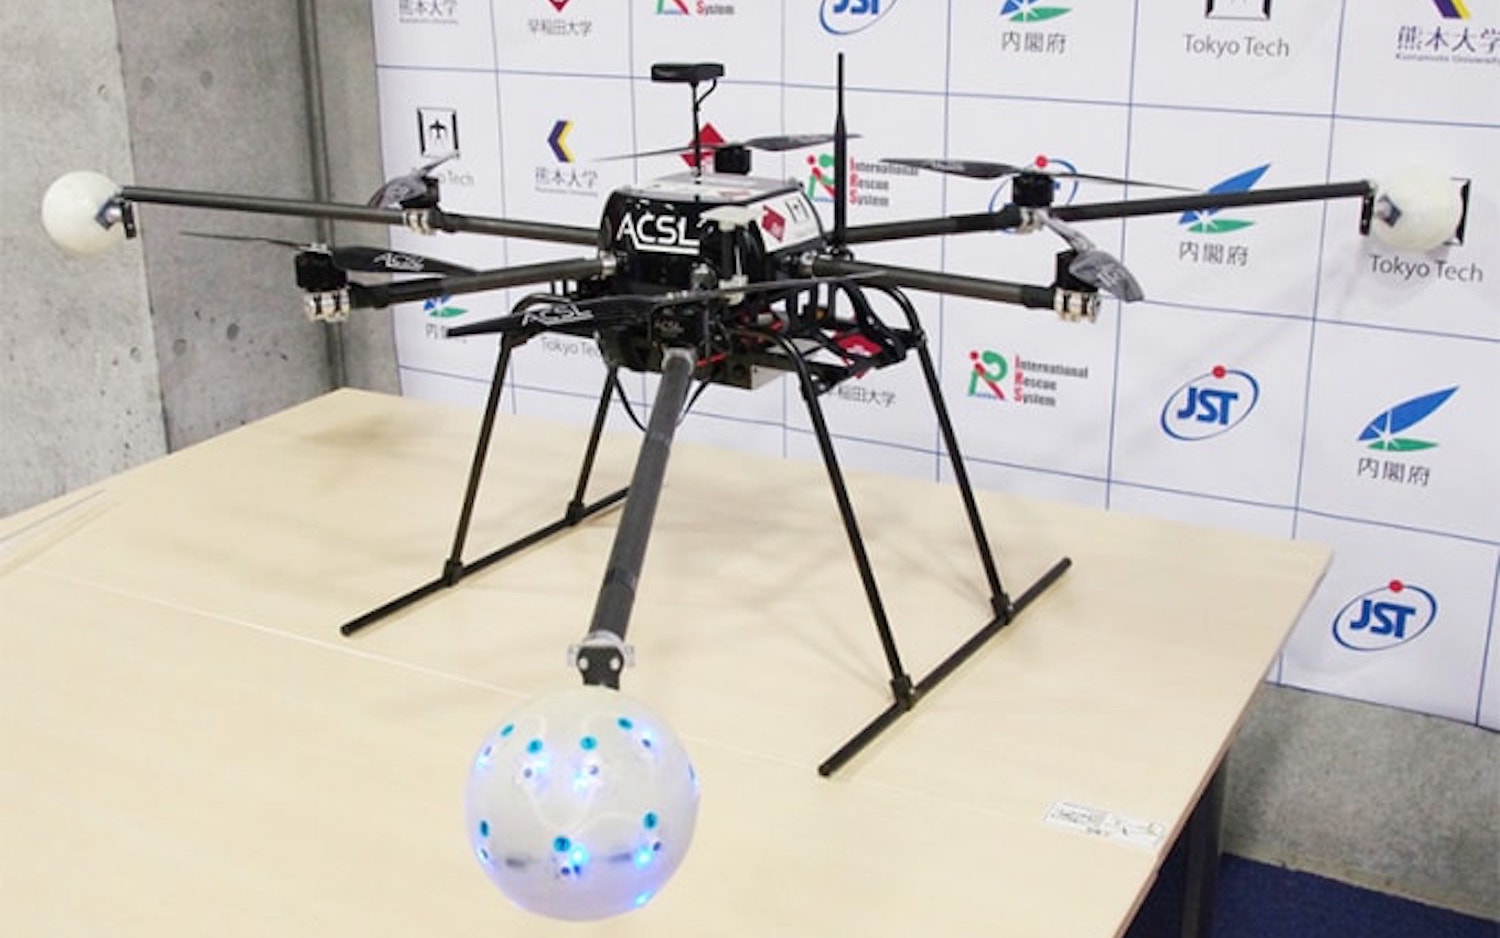 Japanese rescue drone can detect cries for help